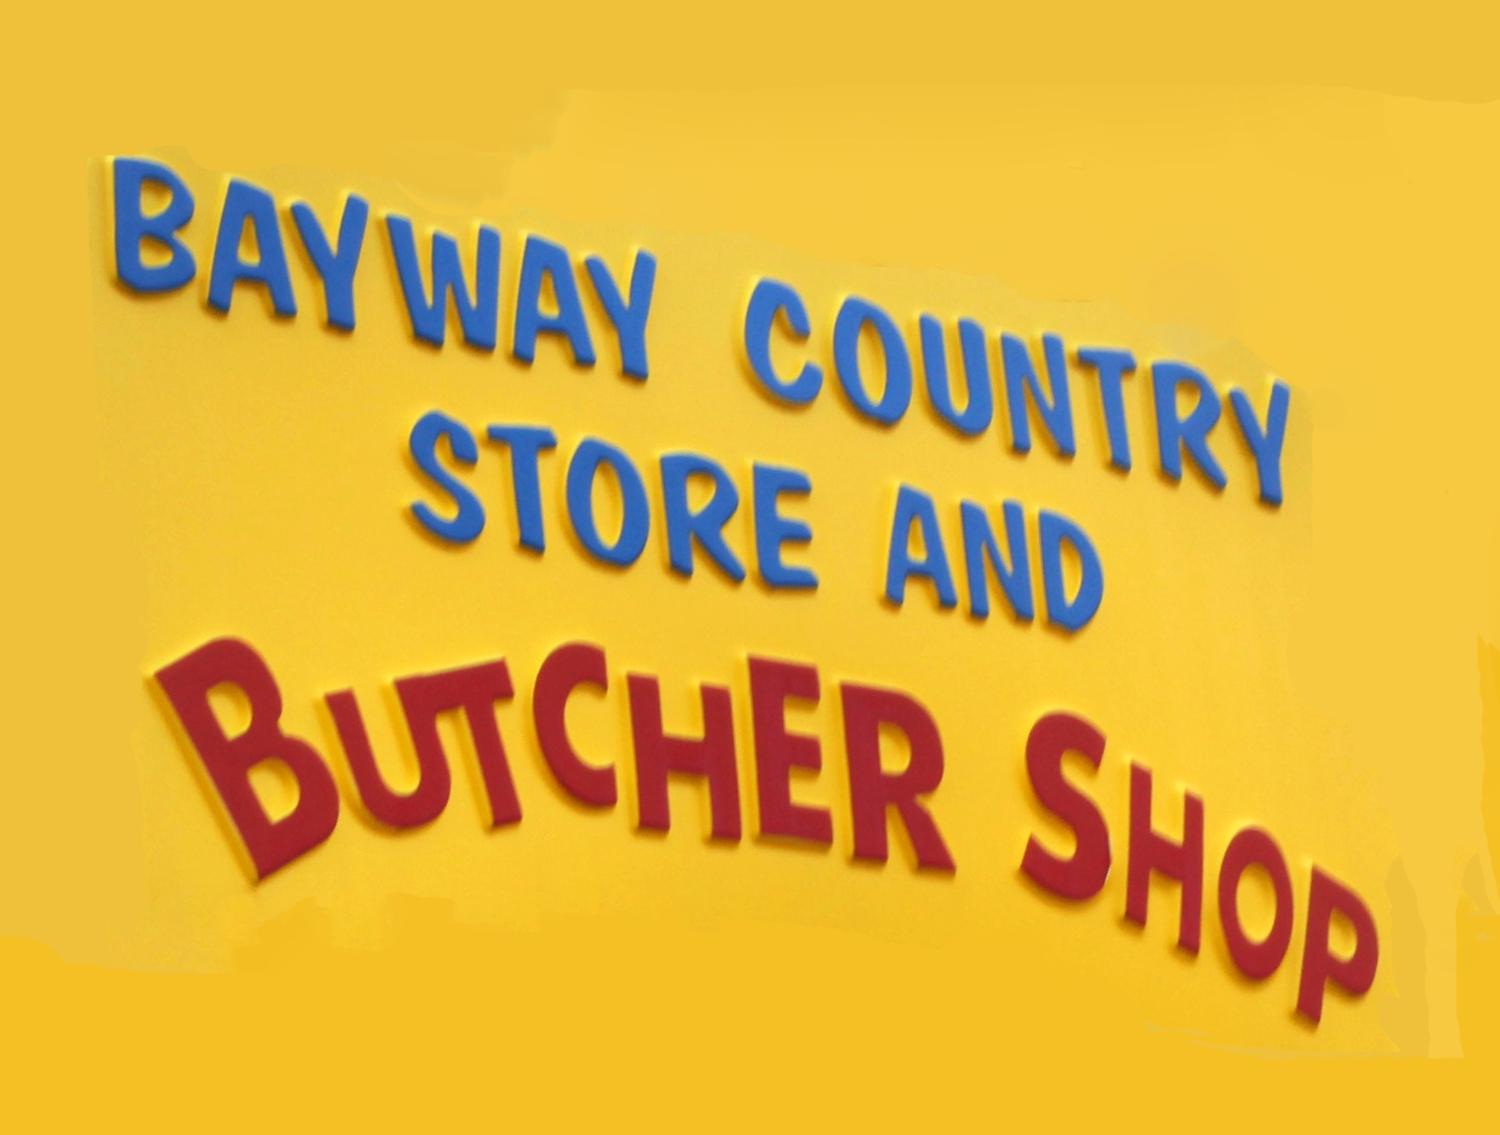 Bayway Country Store